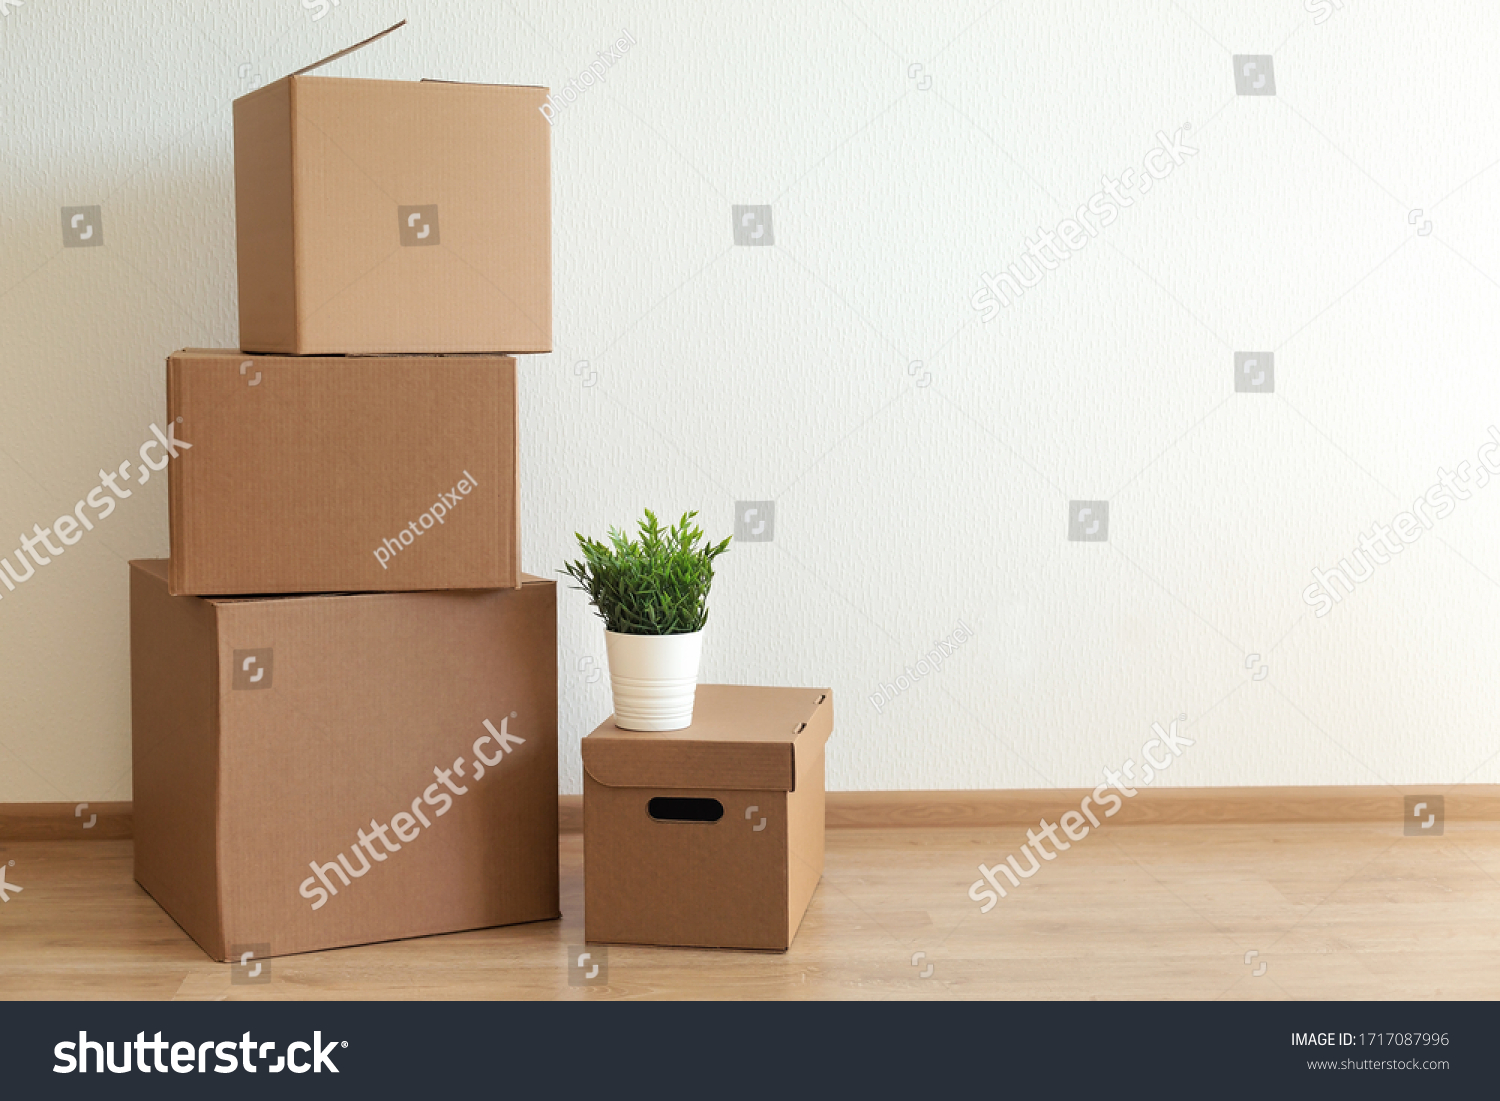 Cardboard boxes in empty room, movement concept. No people #1717087996